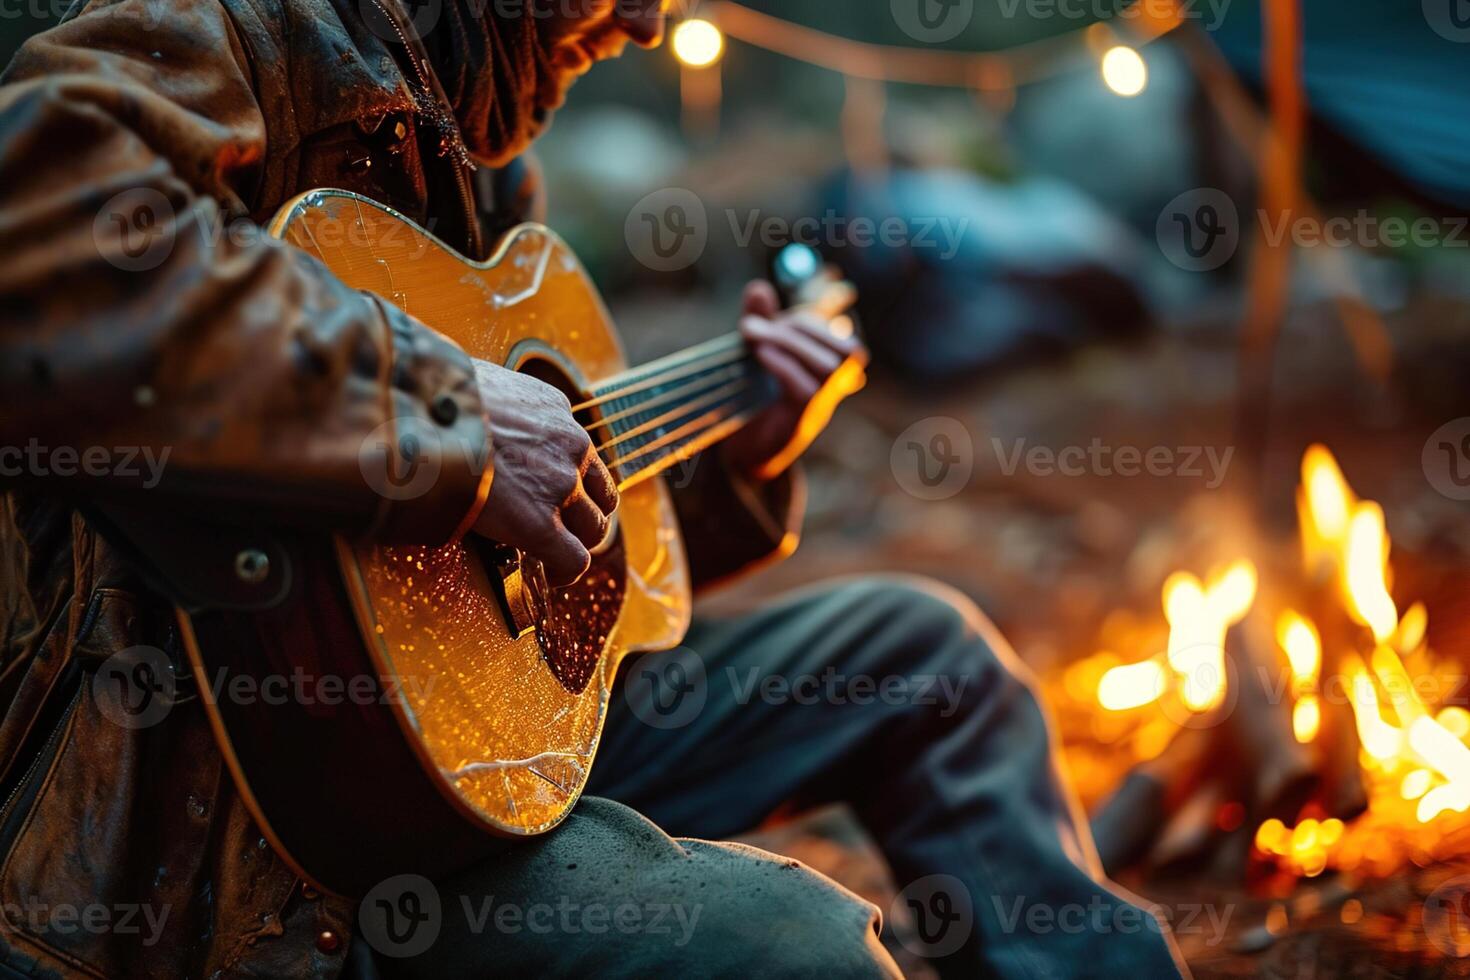 AI generated wanderer in a brown leather jacket plays an old cracked guitar in a camp near a burning fire in the autumn forest photo